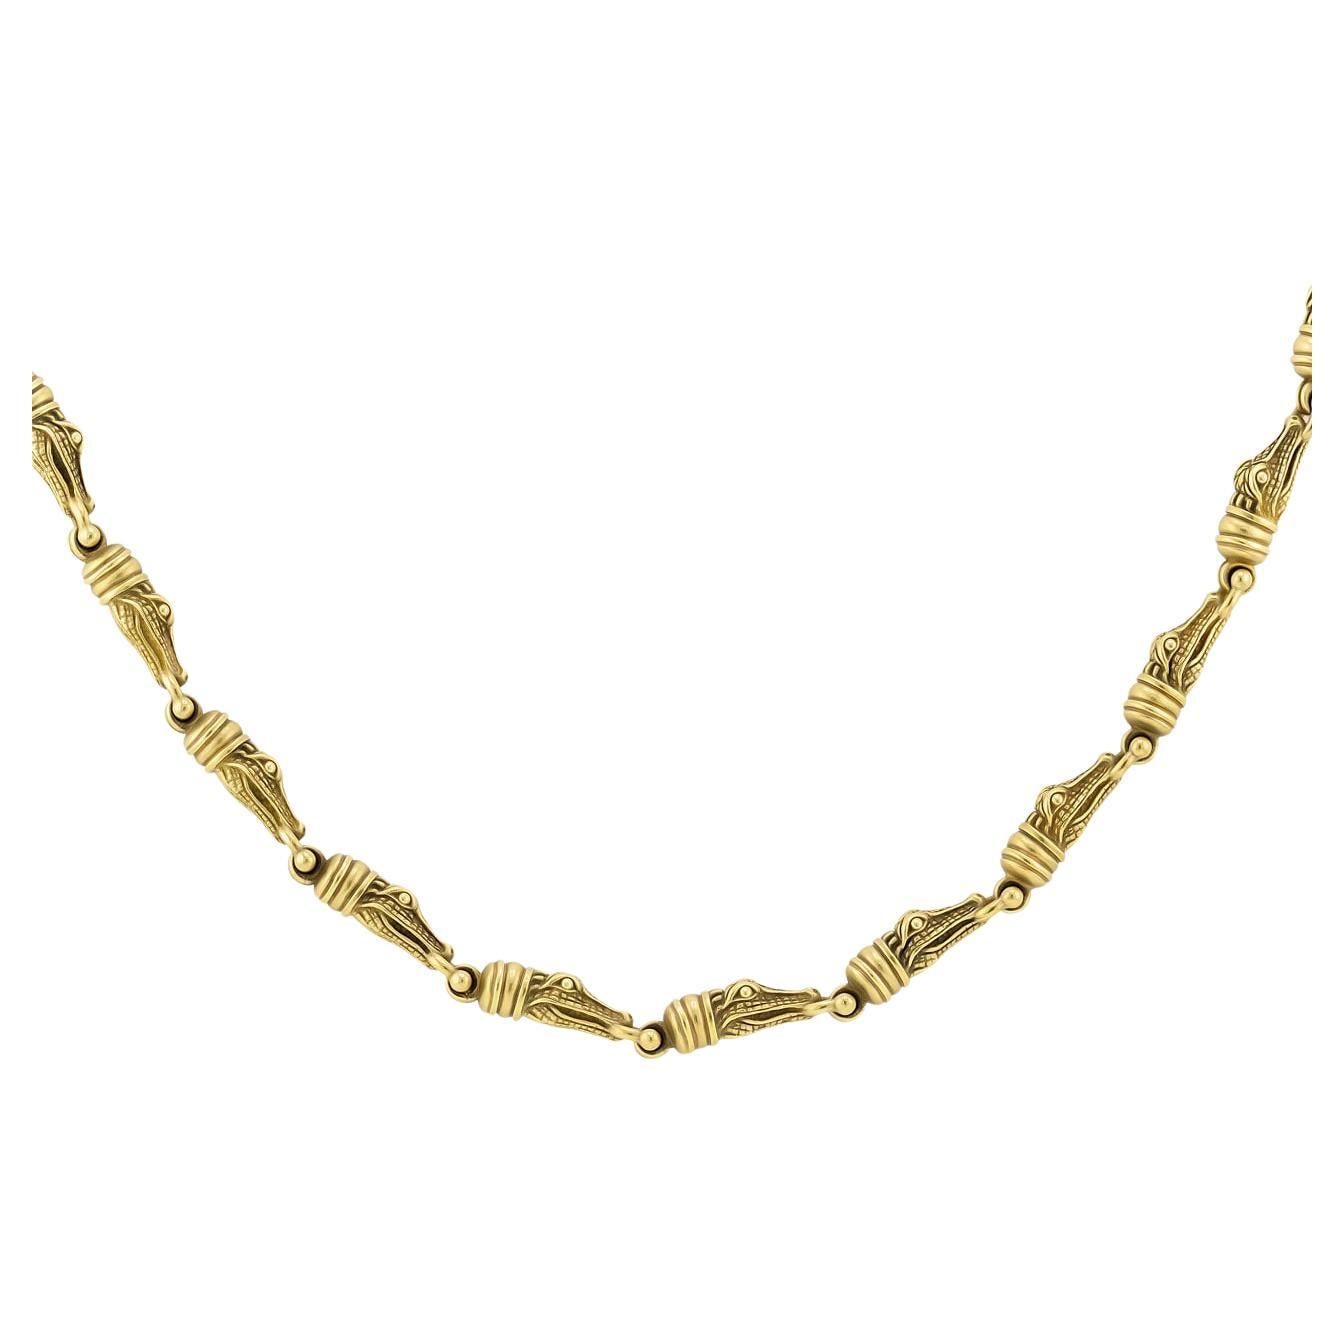 Barry Kieselstein-Cord 18K Yellow Gold Alligator Necklace For Sale